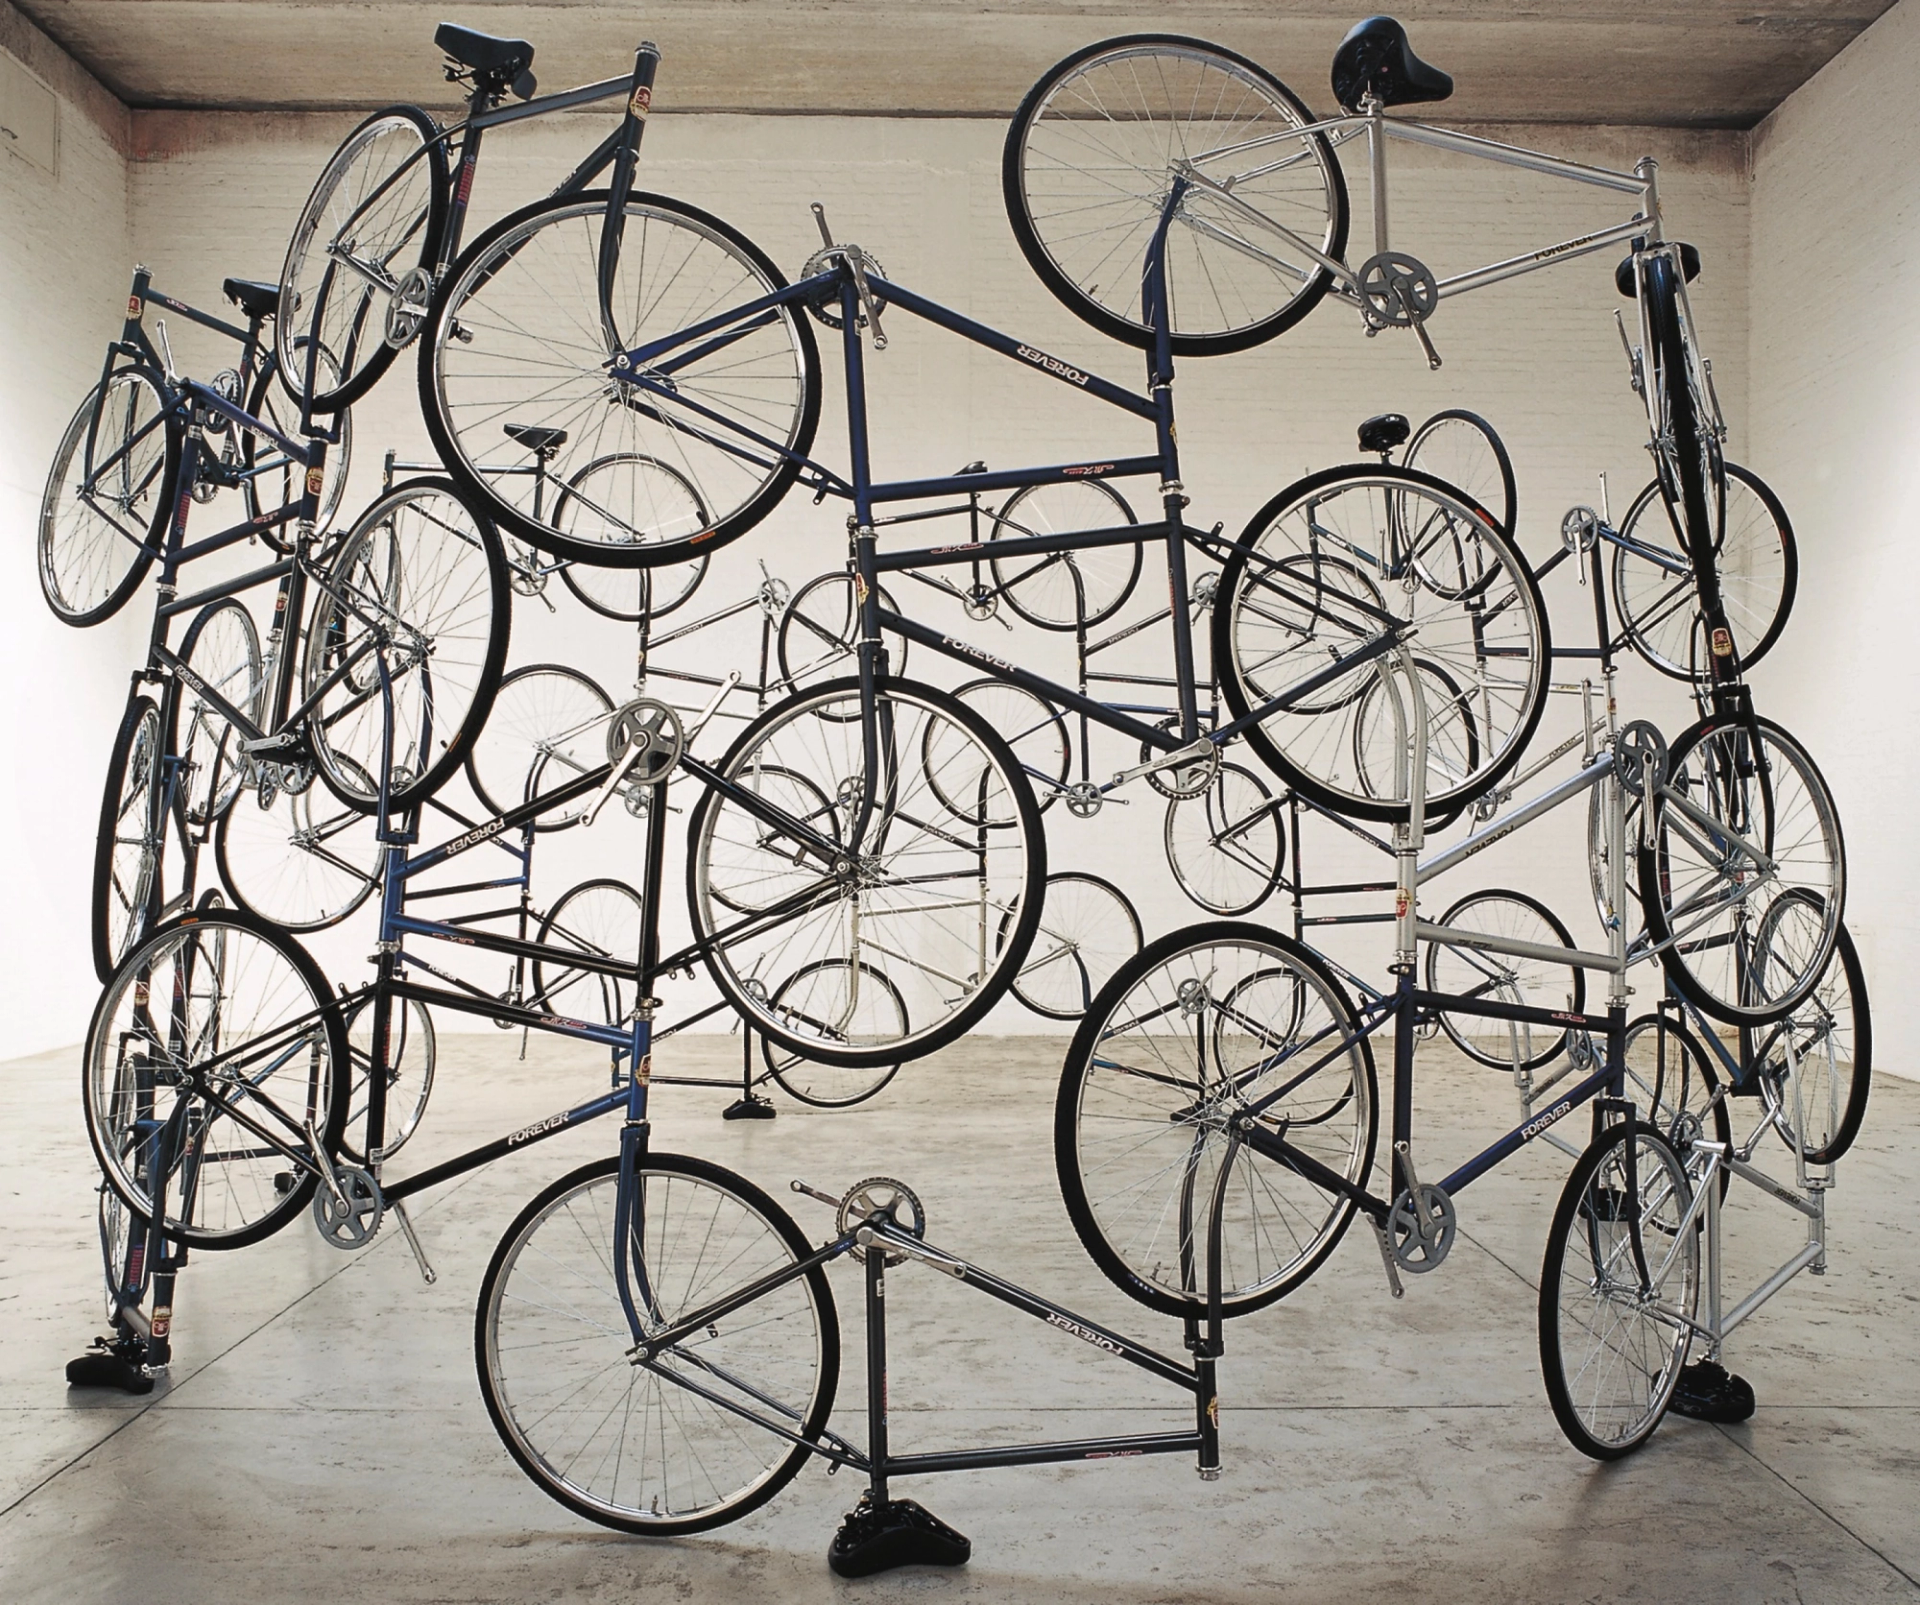 A photograph capturing an intricate sculptural assembly of bicycles, creatively interwoven and locked together through their wheels and handlebars, forming a large-scale sculpture. The artwork is displayed in an empty gallery space.